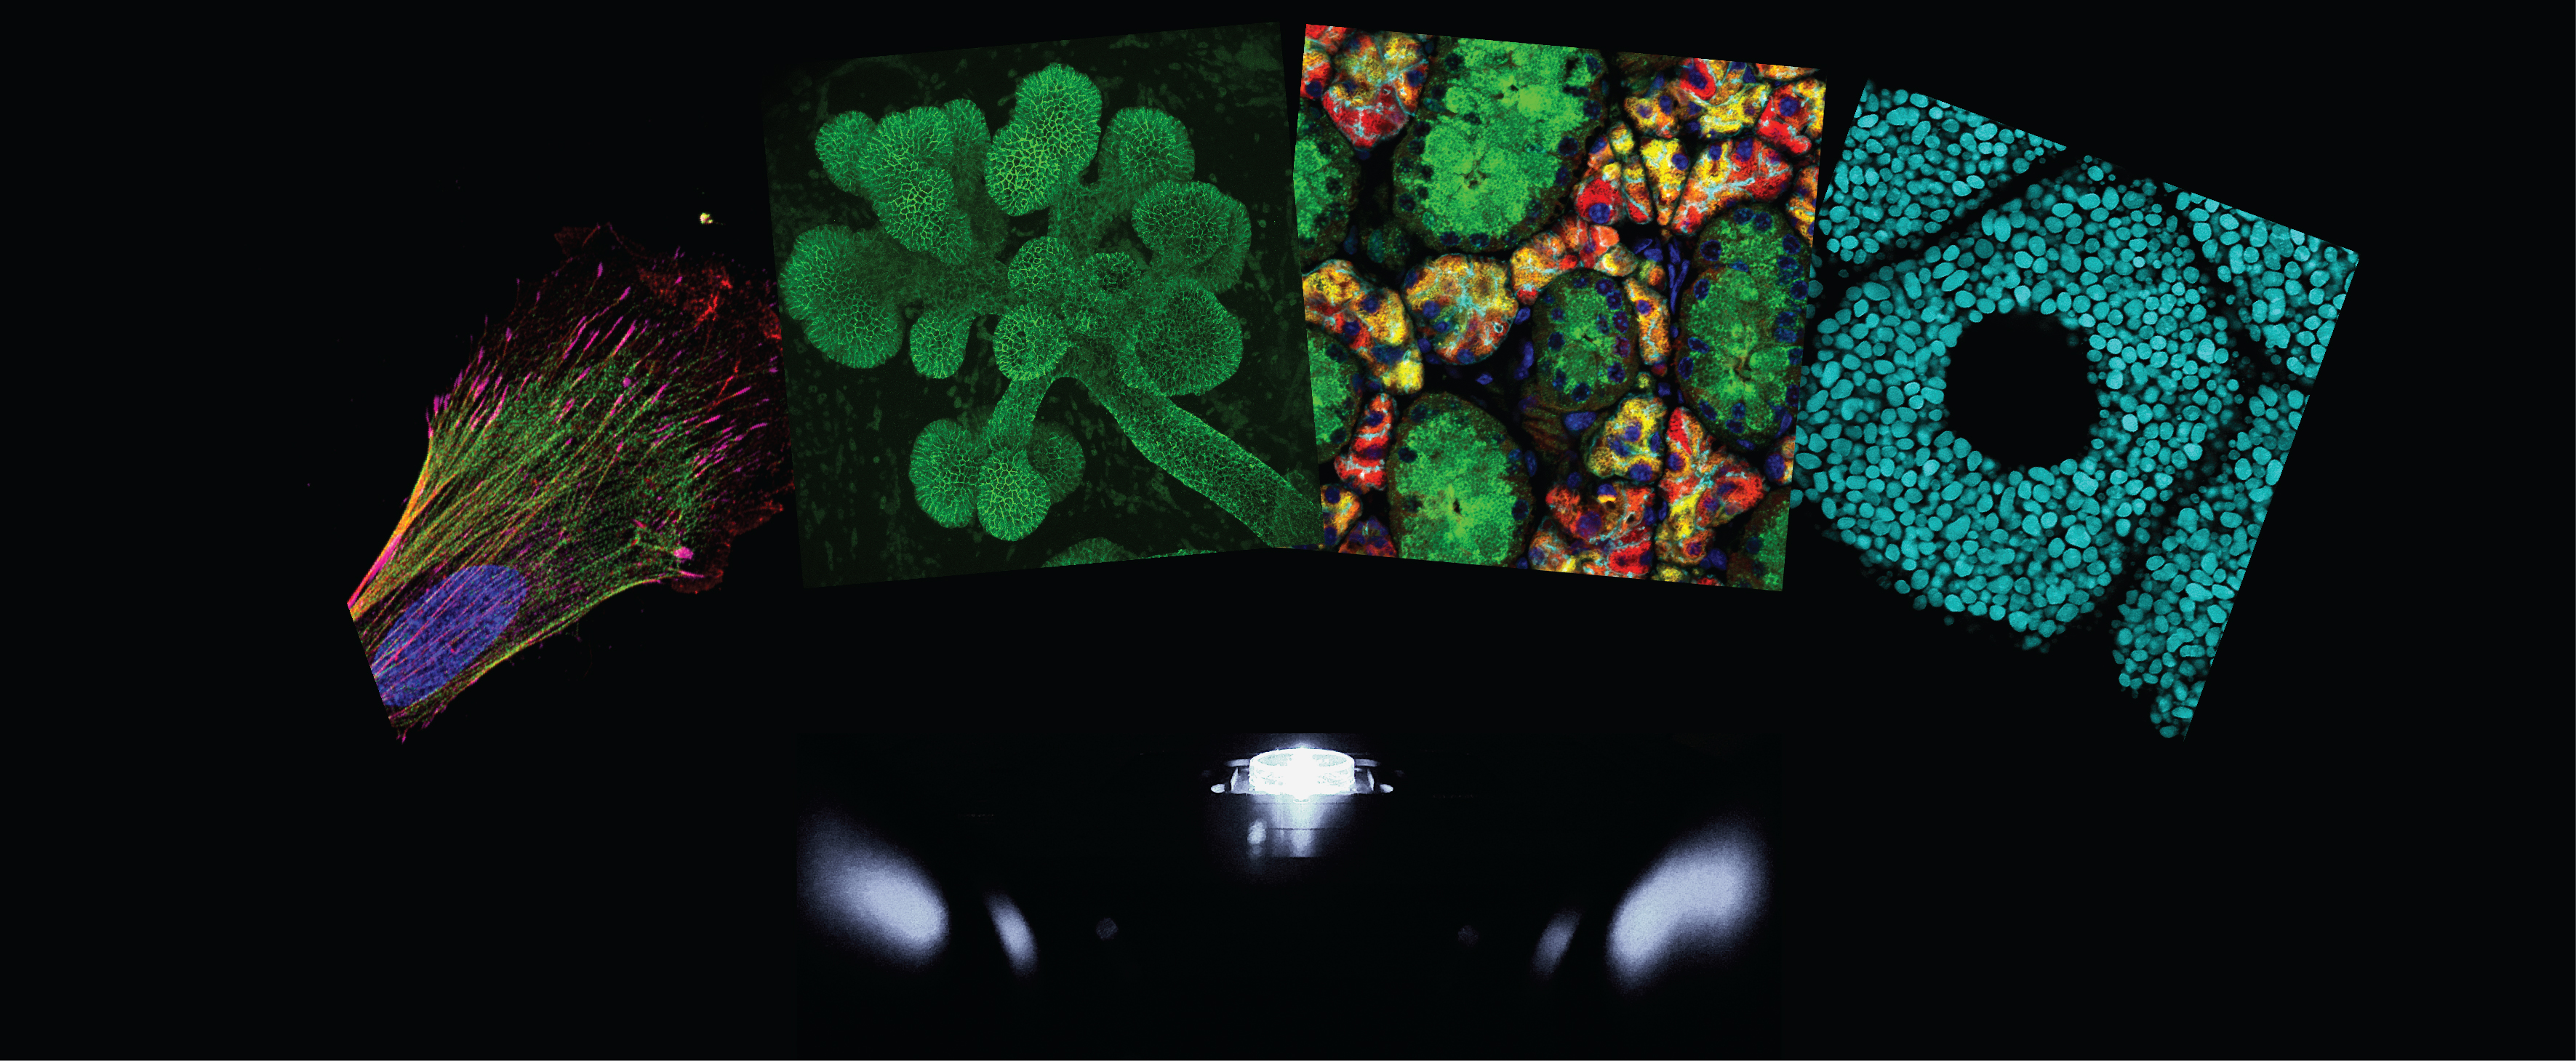 Imaging core microscopy images